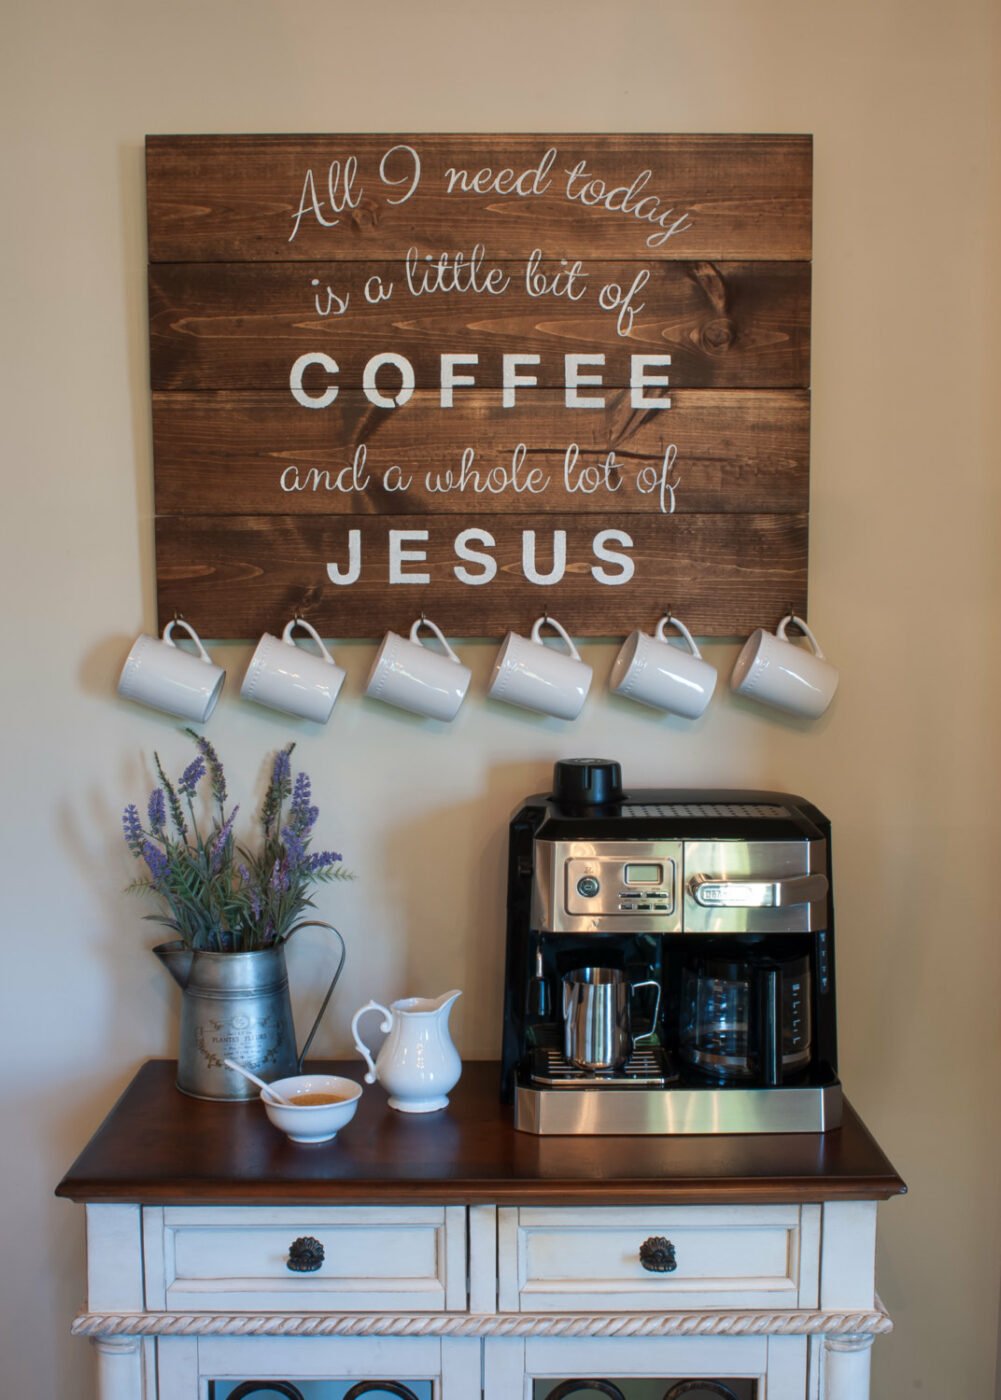 Getting Your Java with Jesus